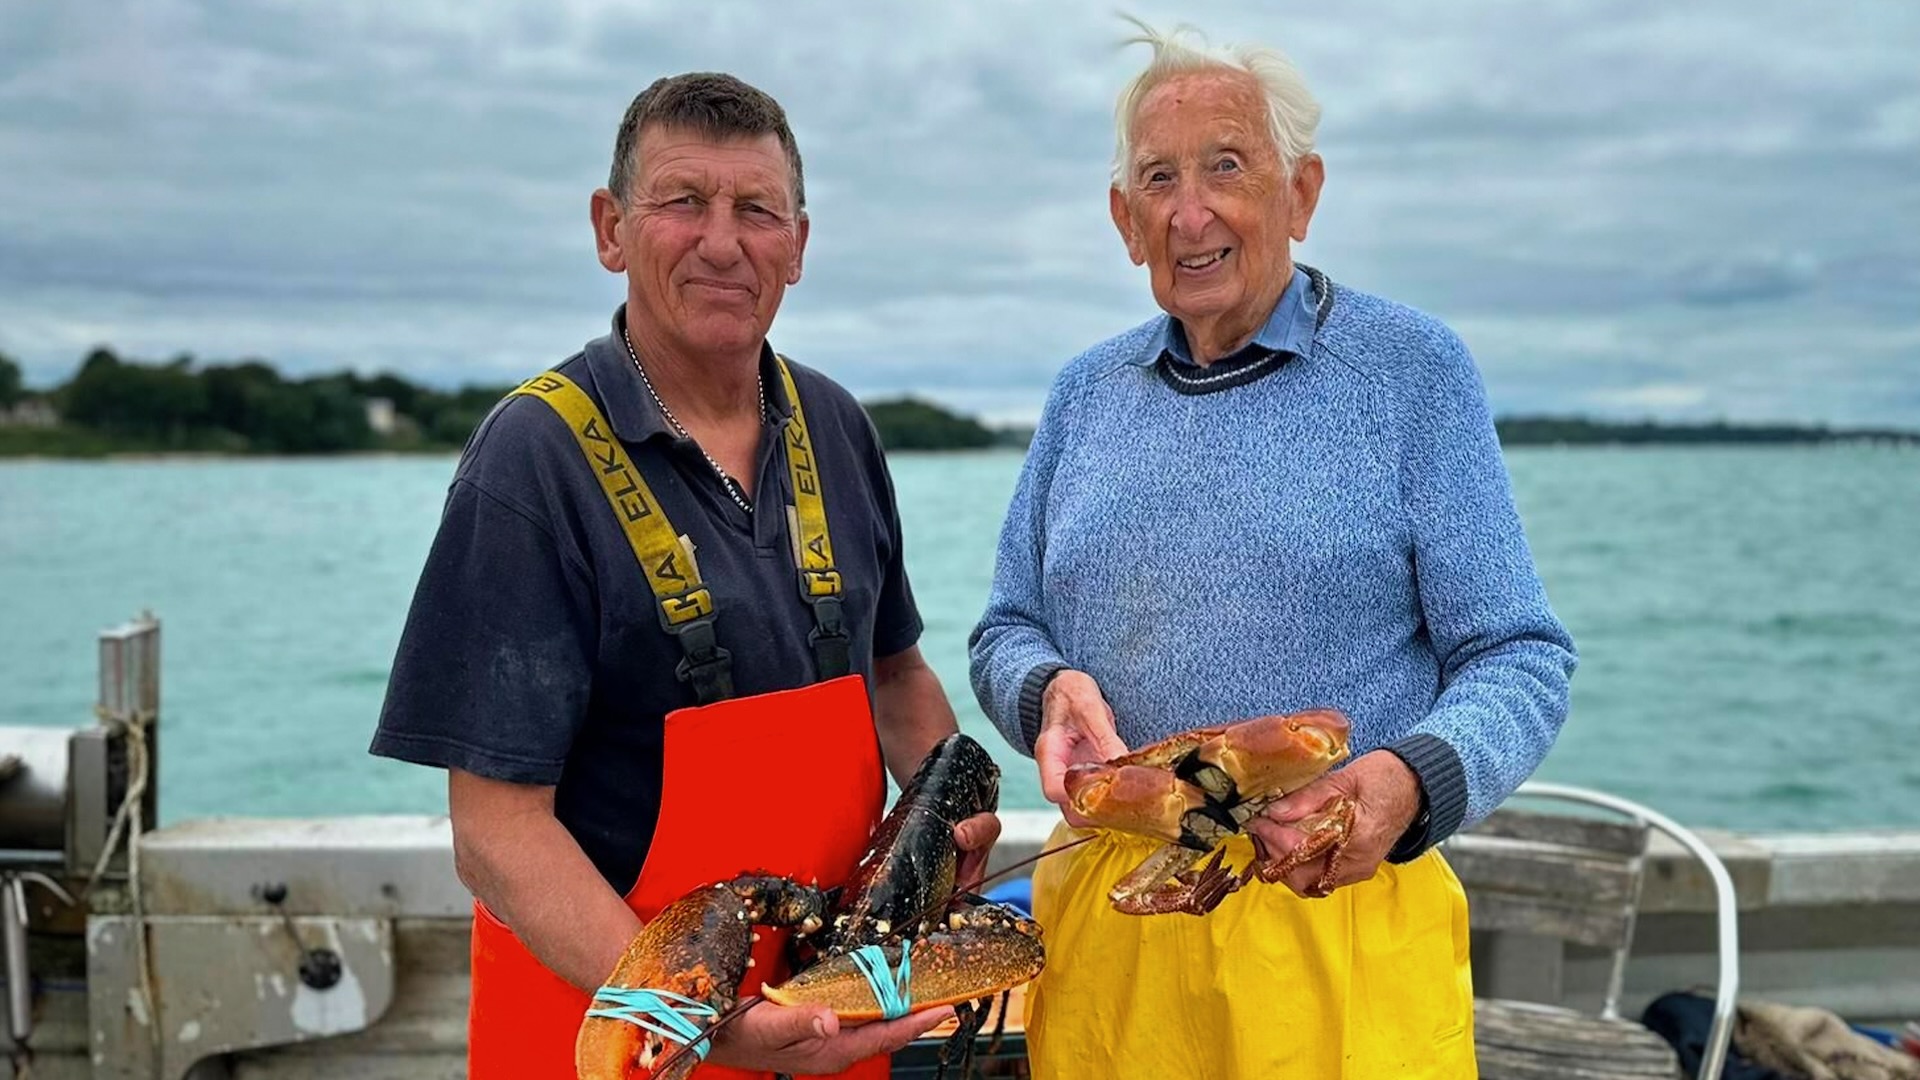 Fisherman pose with lobsters and crab for Channel 5's Isle Of Wight programme